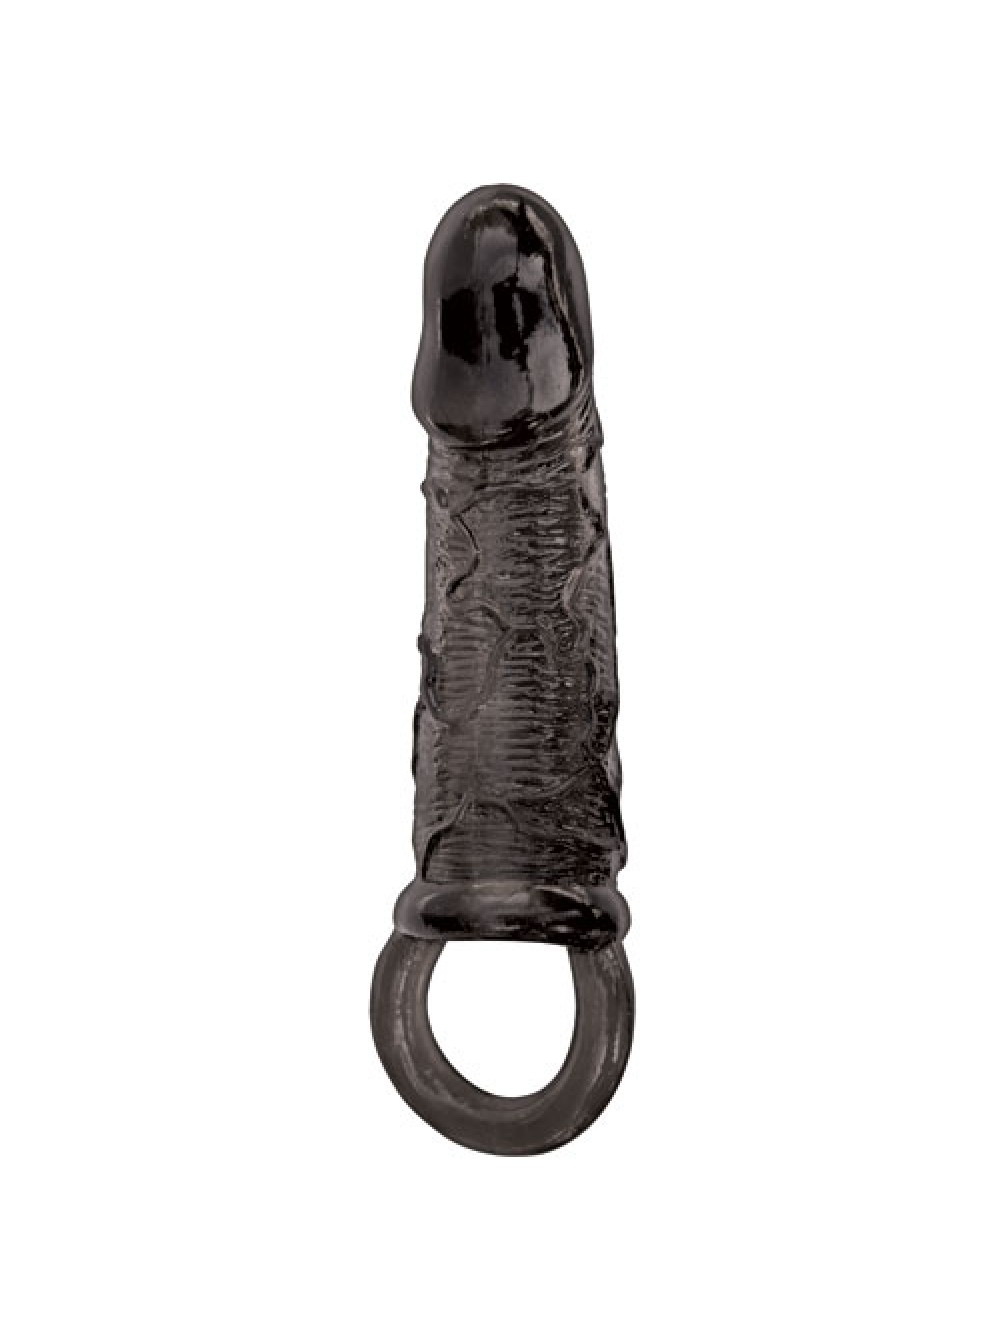 Mack Tuff Compact Penis Extender 5.71 Inch 782631252309